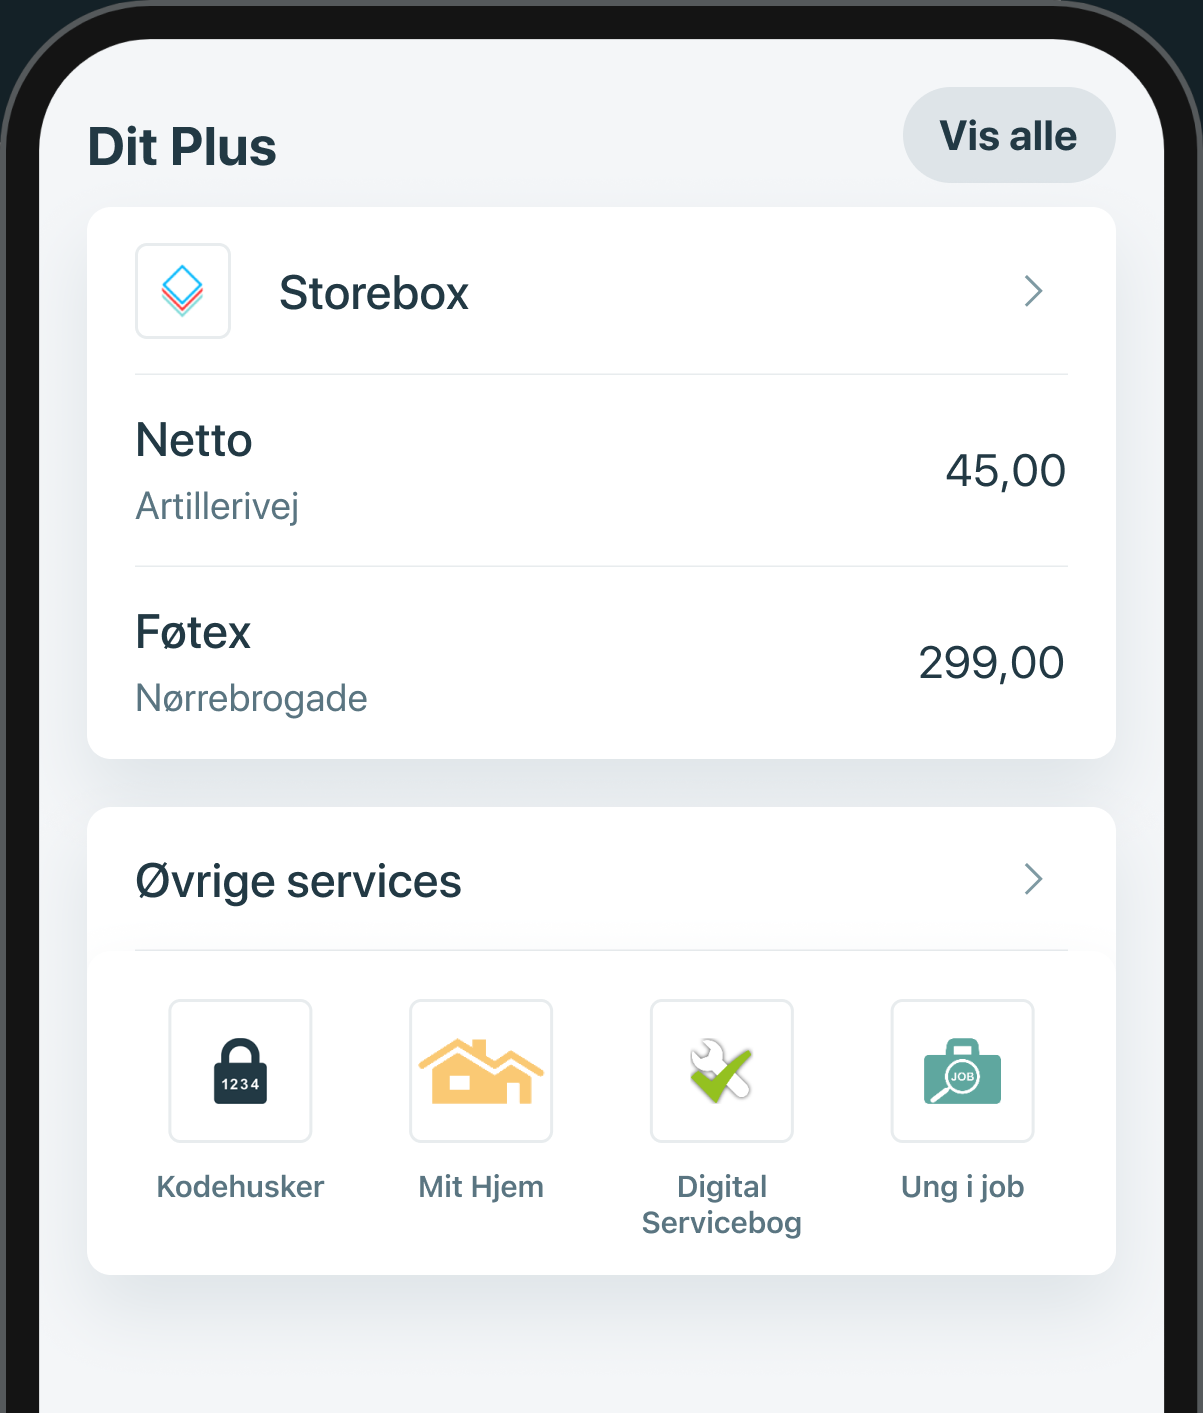 evig kyst Ofre e-Boks is the most widely used digital mailbox in Denmark.